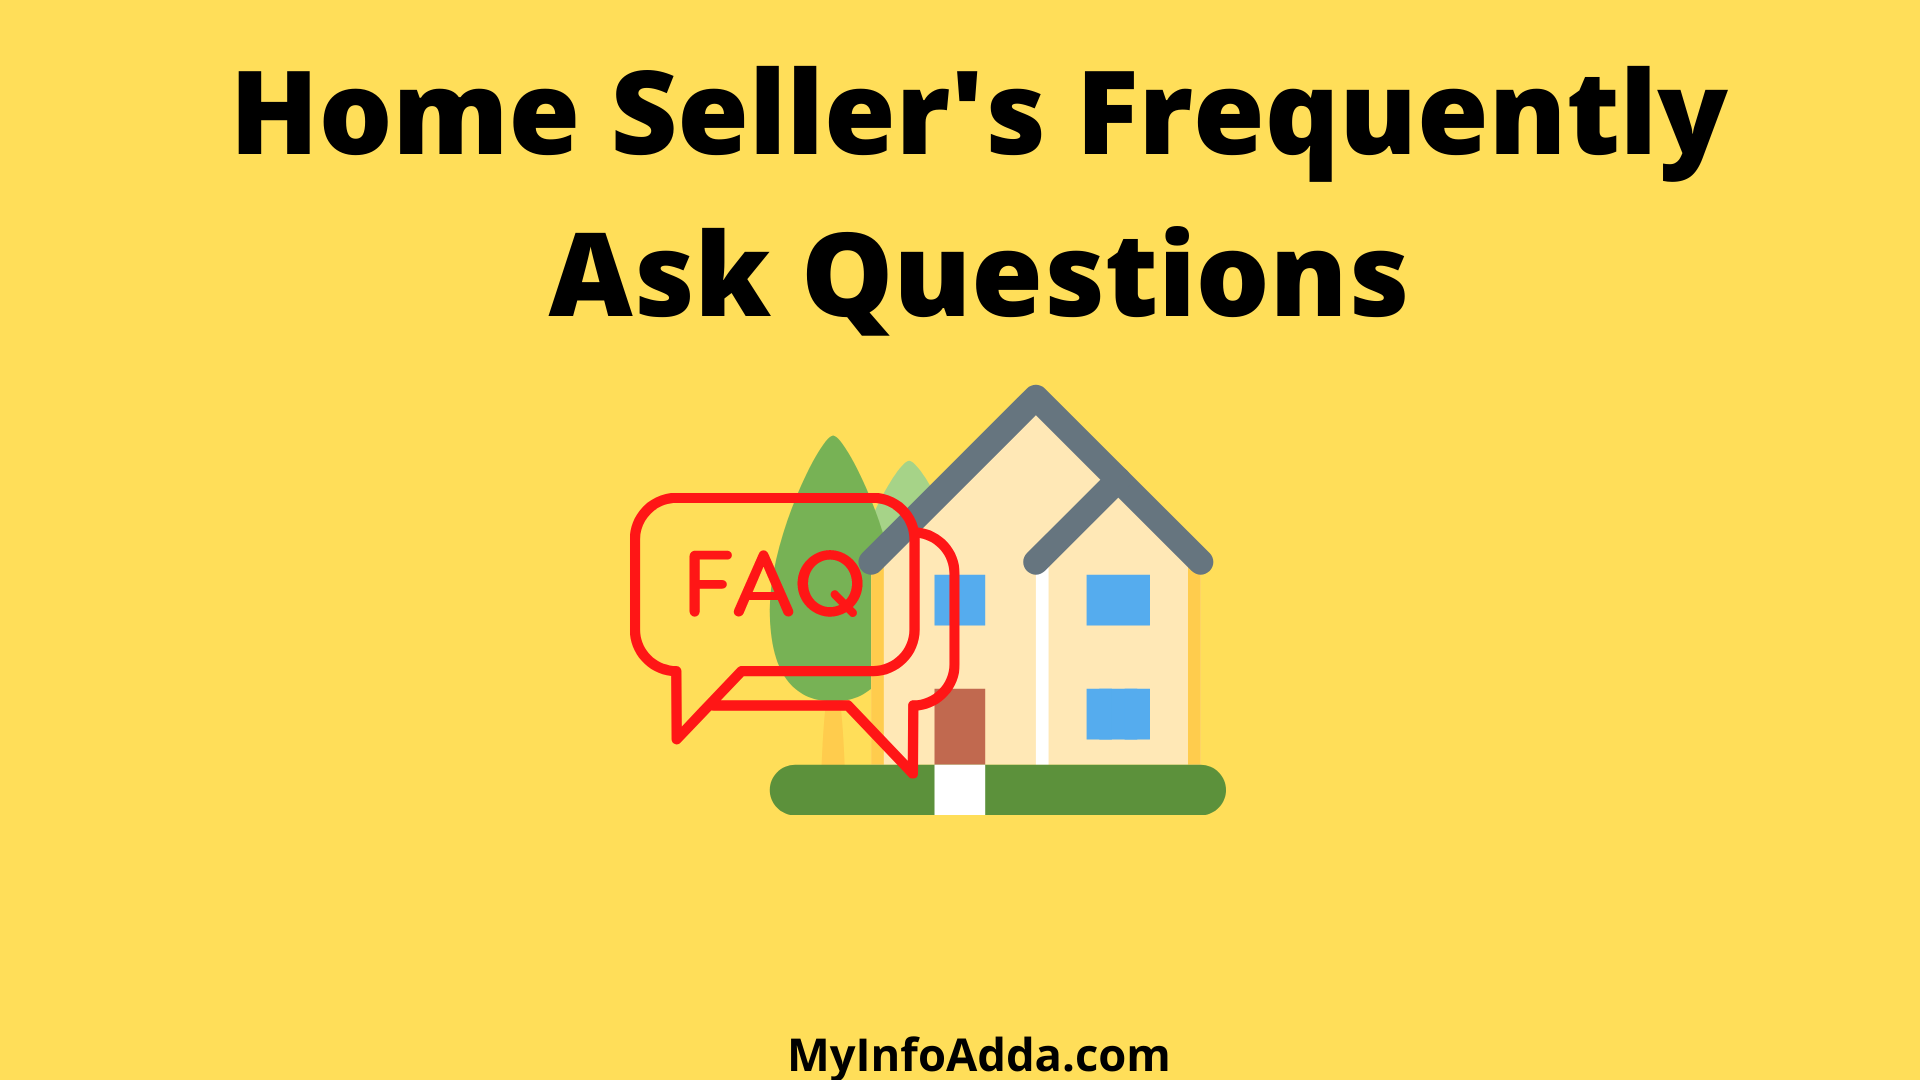 Home Seller's Frequently Ask Questions